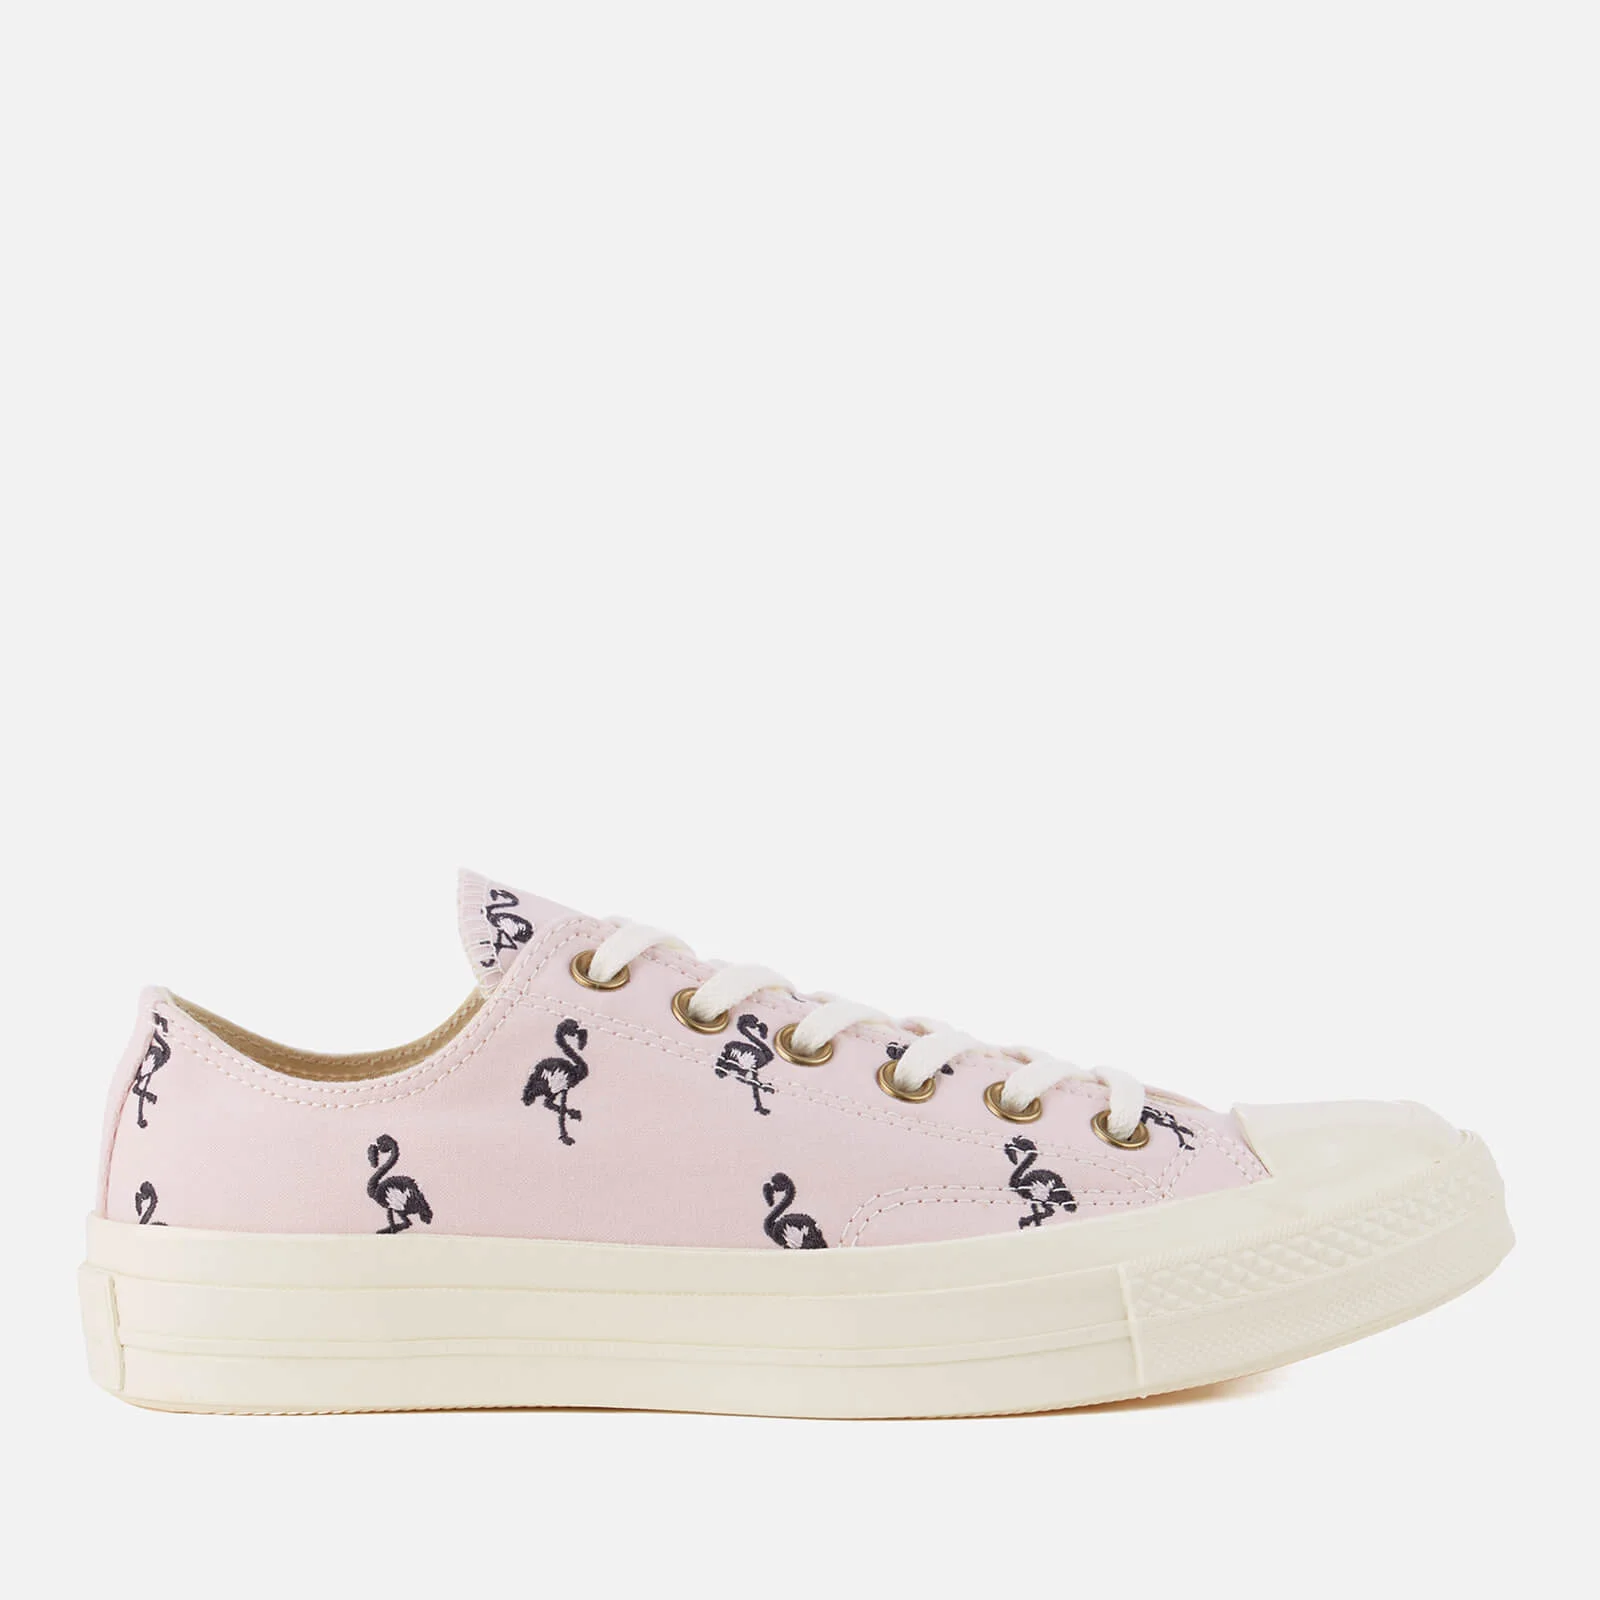 Converse Chuck Taylor All Star '70 Ox Trainers - Barely Rose/Almost Black/Egret Image 1